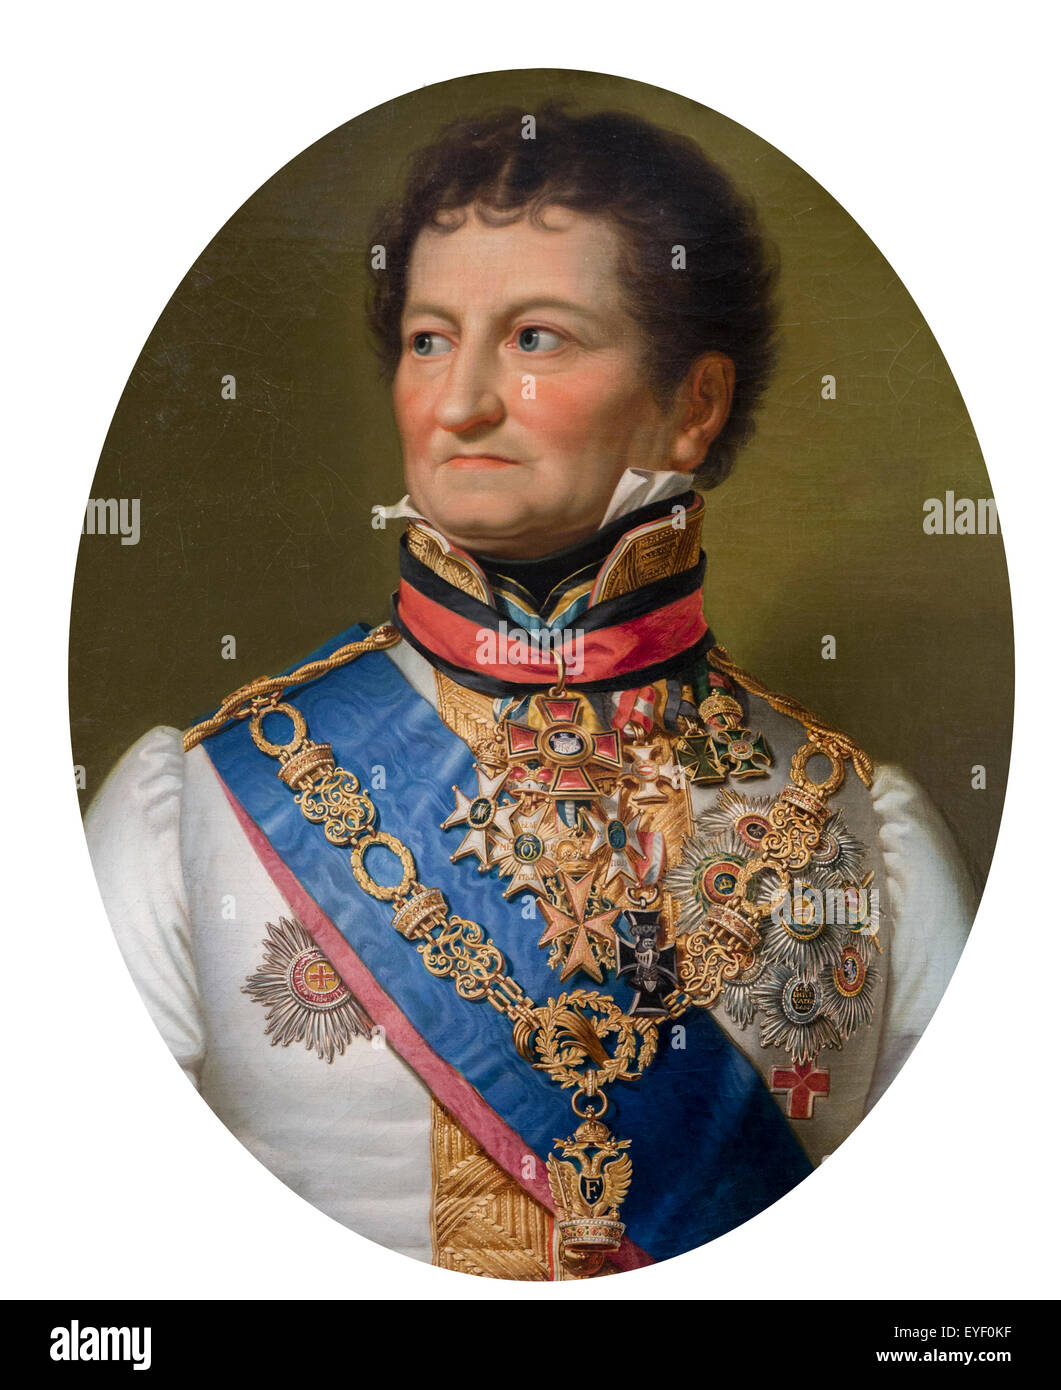 Austrian General Baron Jean Pierre Theodore de Wacquant-Geozelles, wearing, among other medals, the collar of the austrian Order of the Iron Crown 07/12/2013 - 19th century Collection Stock Photo